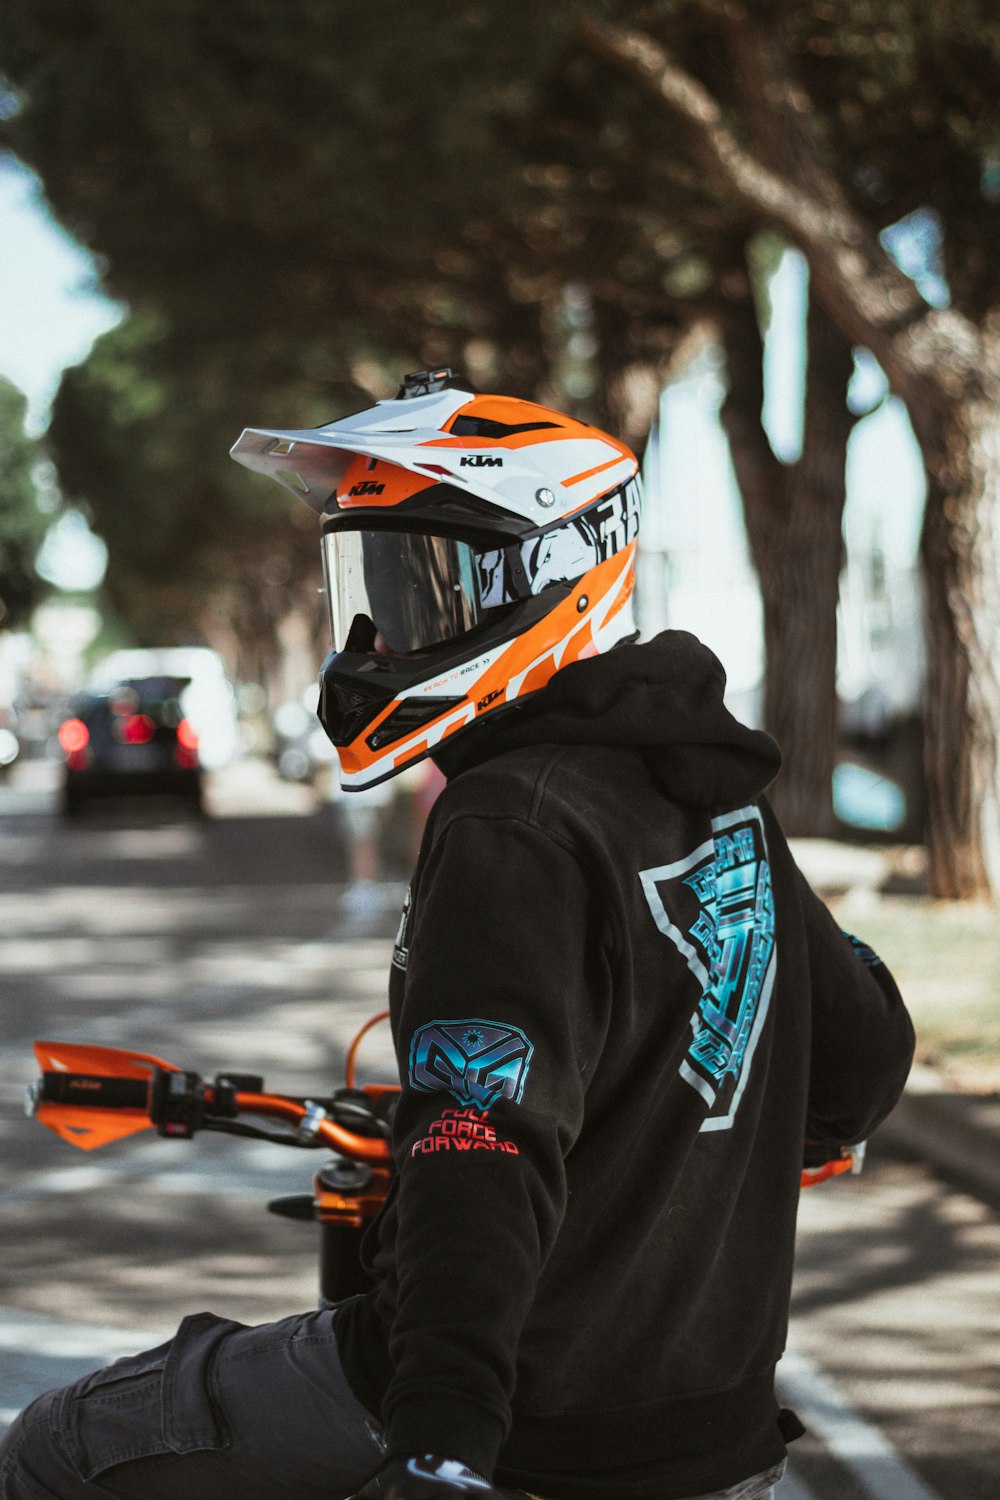 500+ Biker Pictures [HQ] | Download Free Images & Stock Photos on Unsplash